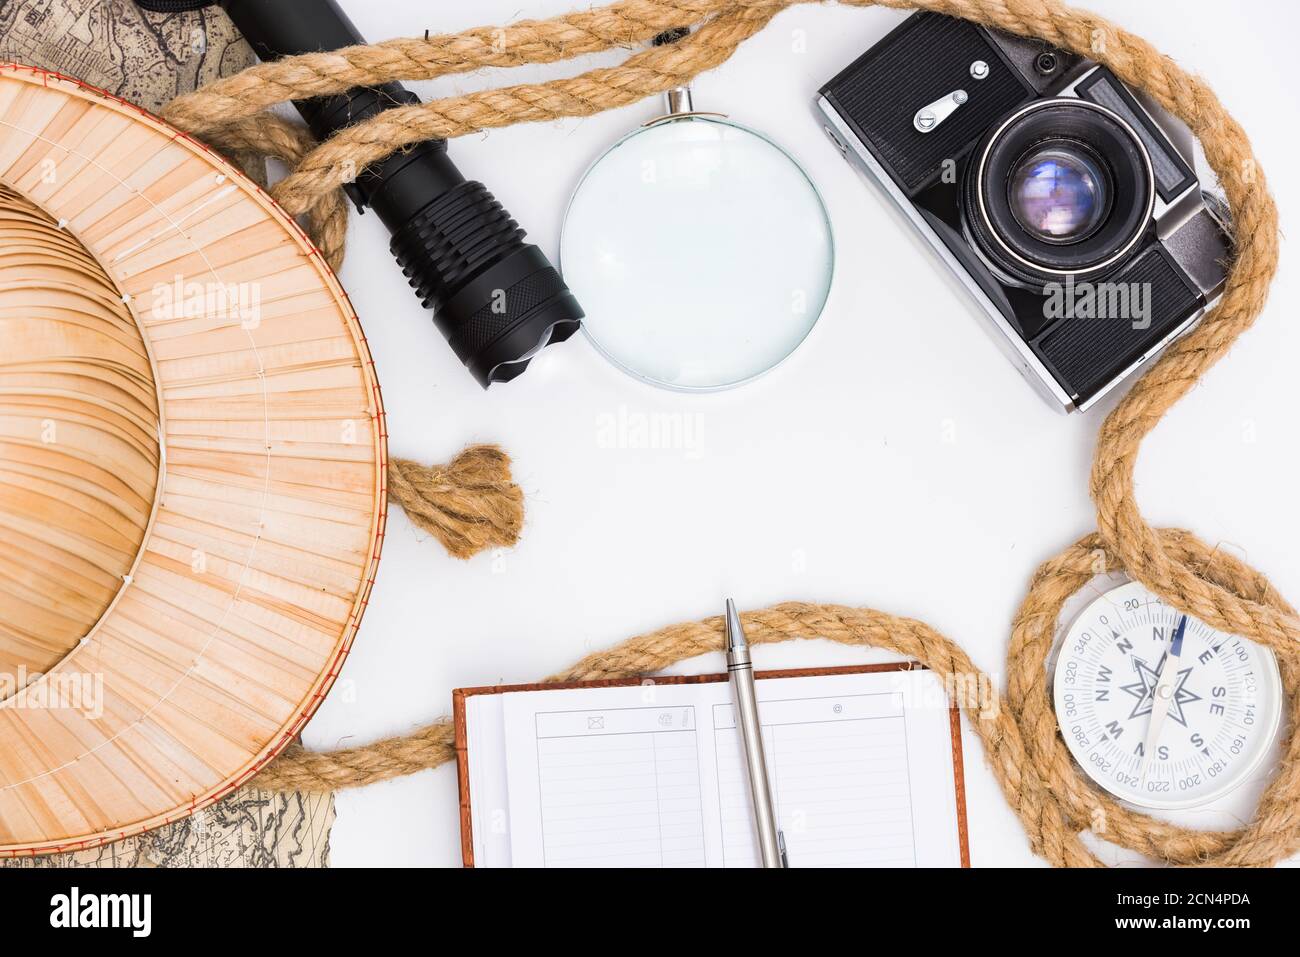 items for outdoor activities on vacation Stock Photo